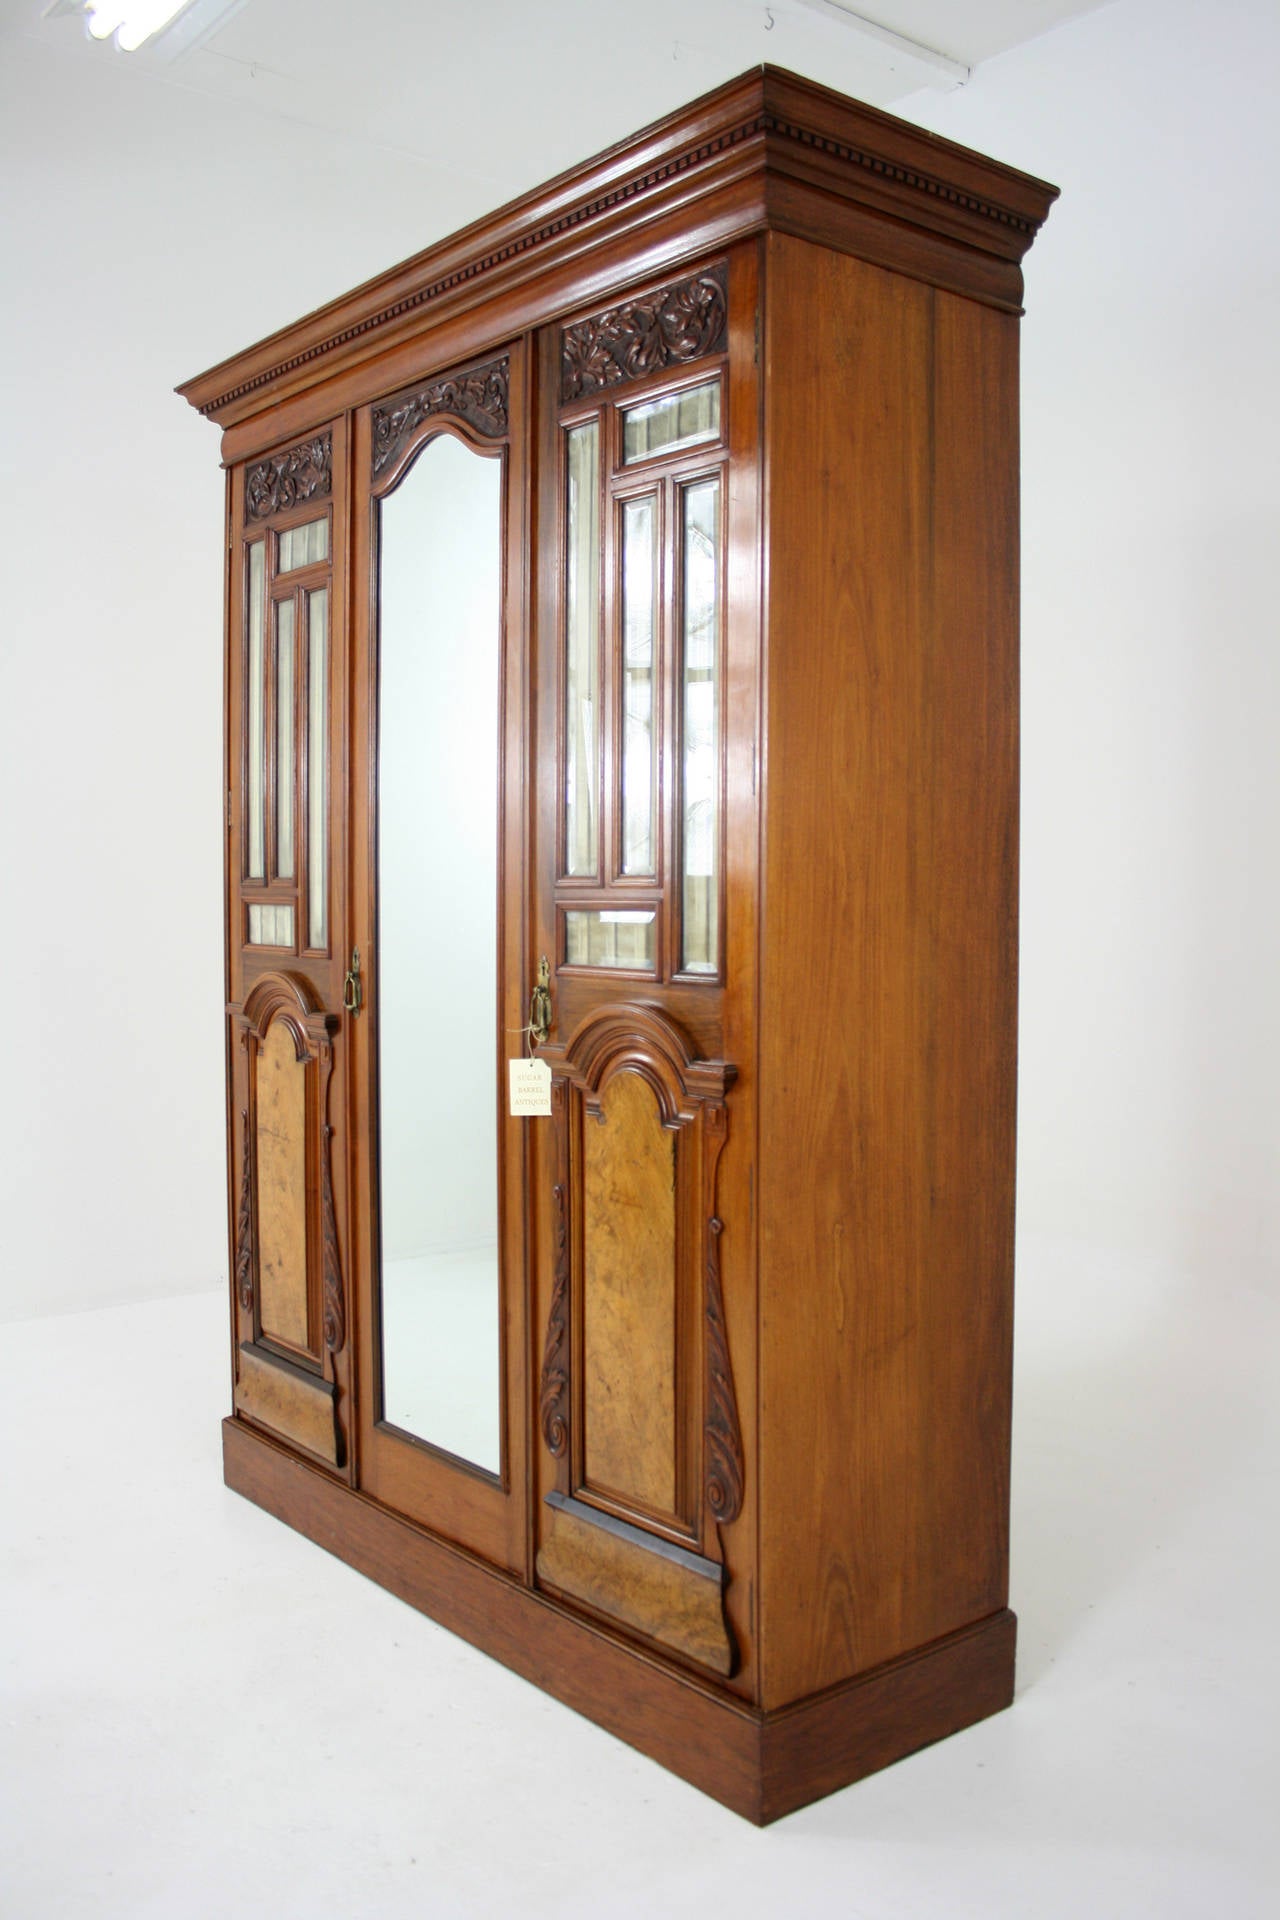 - Scotland, 1870
 - Victorian
 - Lovely solid walnut with burled walnut veneer
 - Bevelled glass doors
 - All original finish
 - Fitted interior
 - Original locks and hardware
 - Lovely warm patina
 - Separates into five pieces
 - 58.5″w x